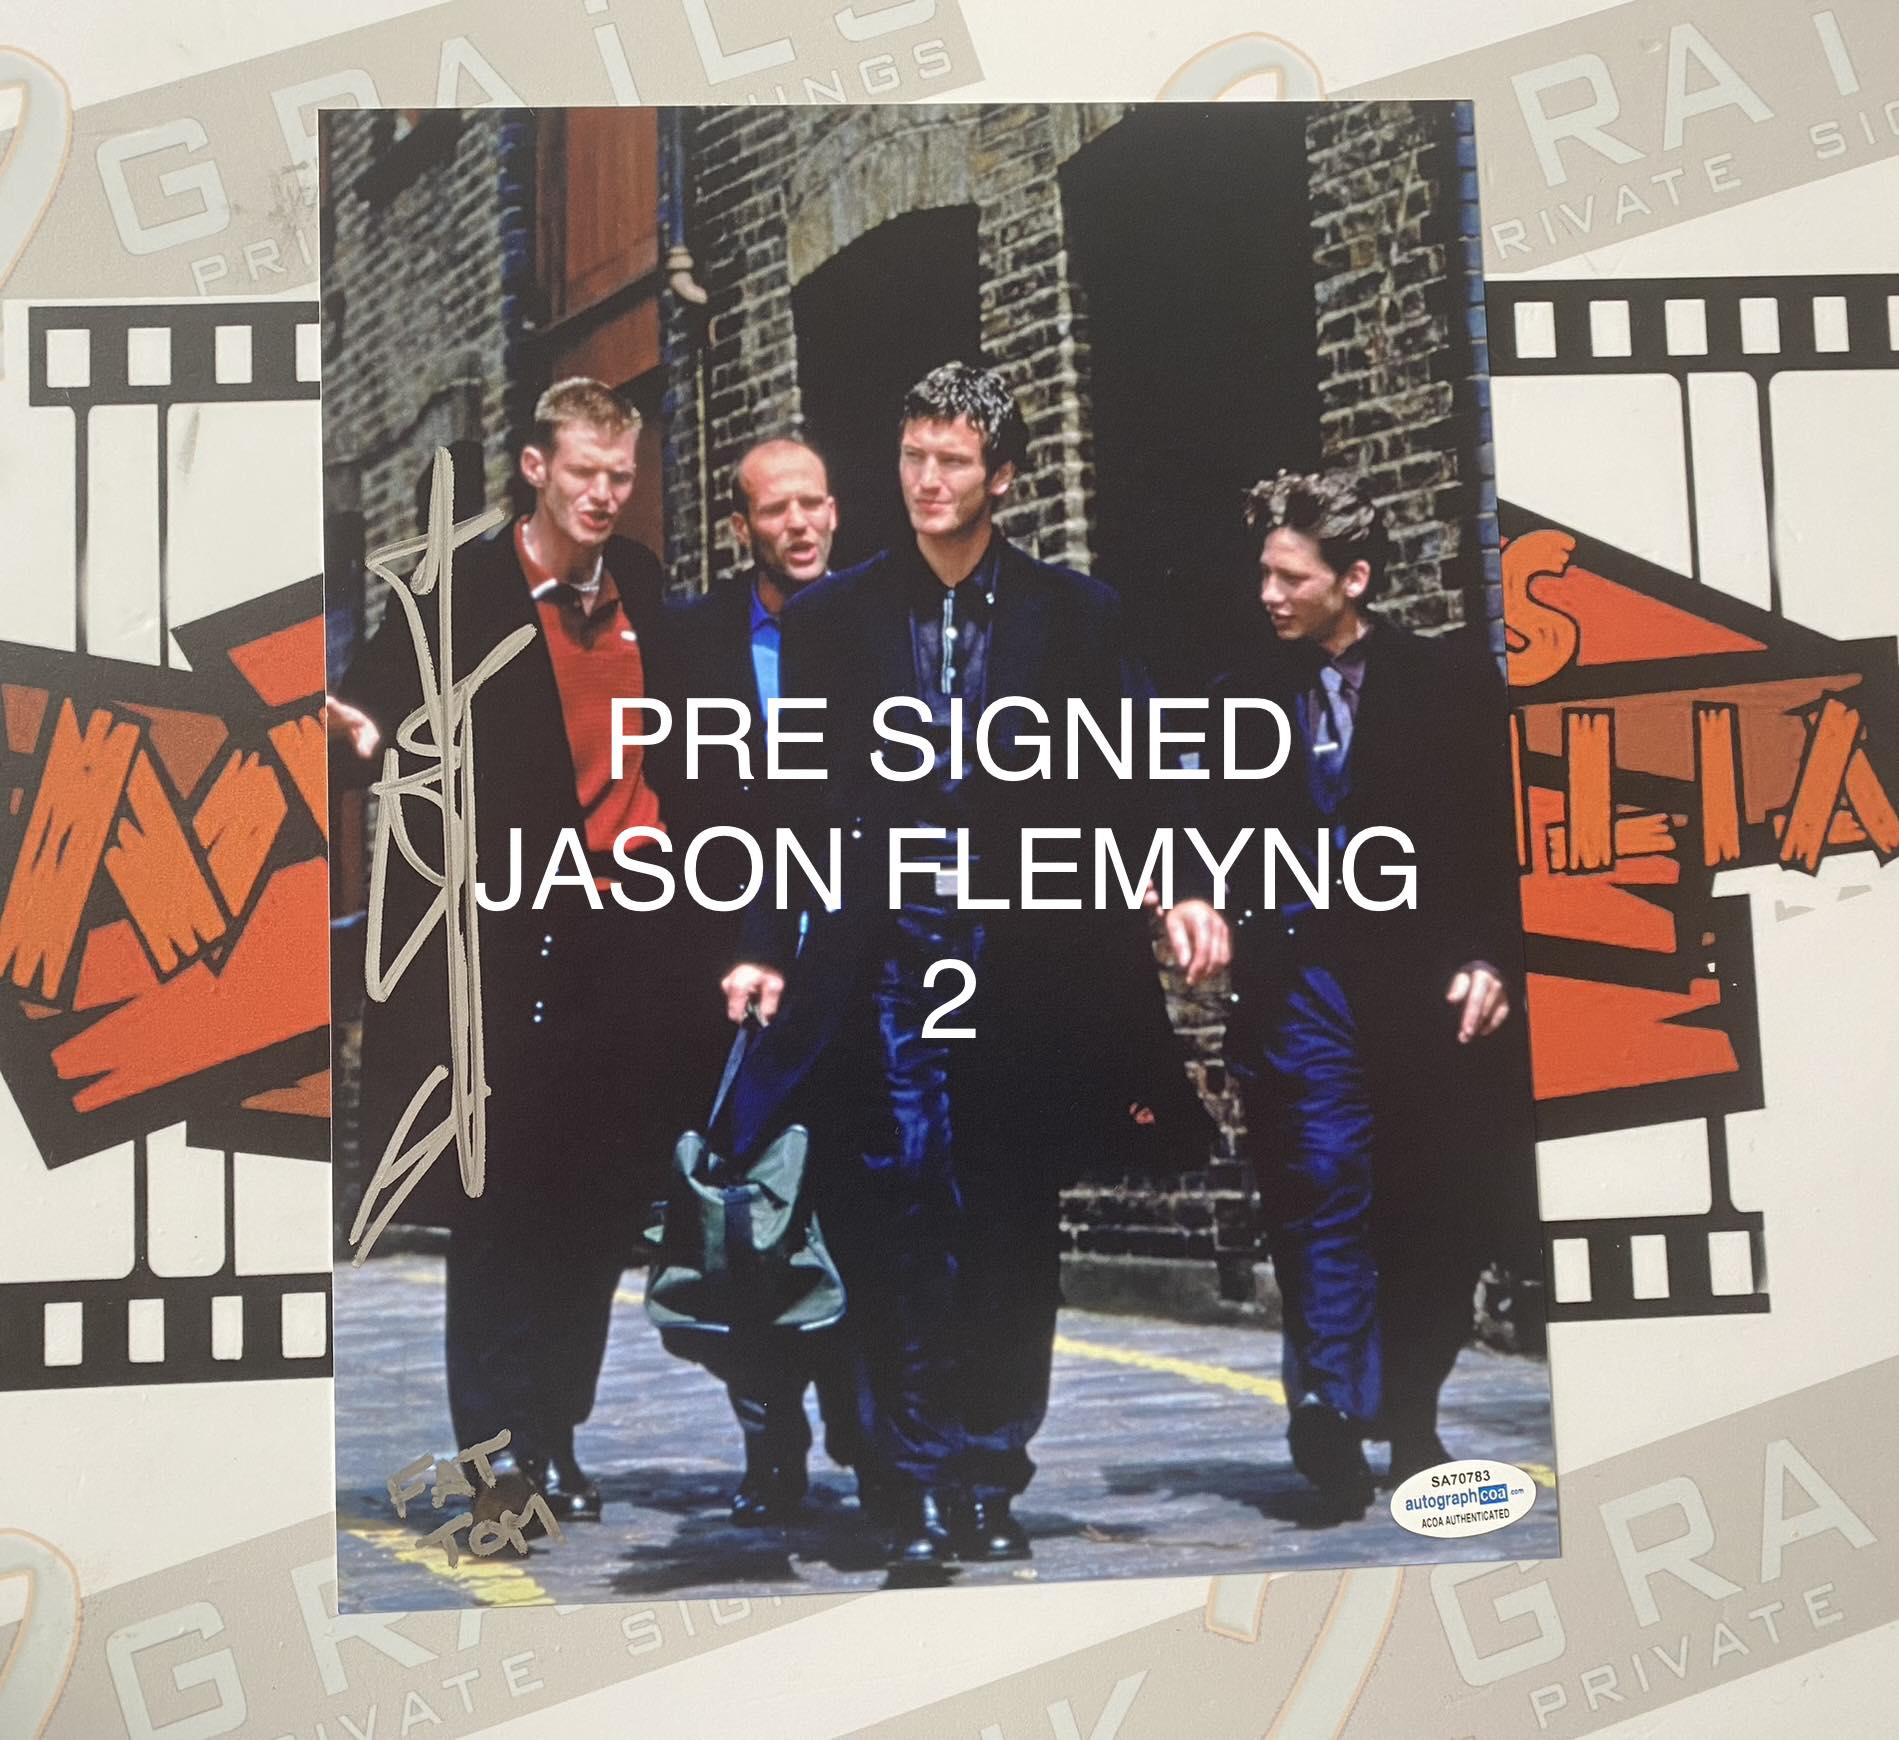 Pre signed Jason Flemyng 1